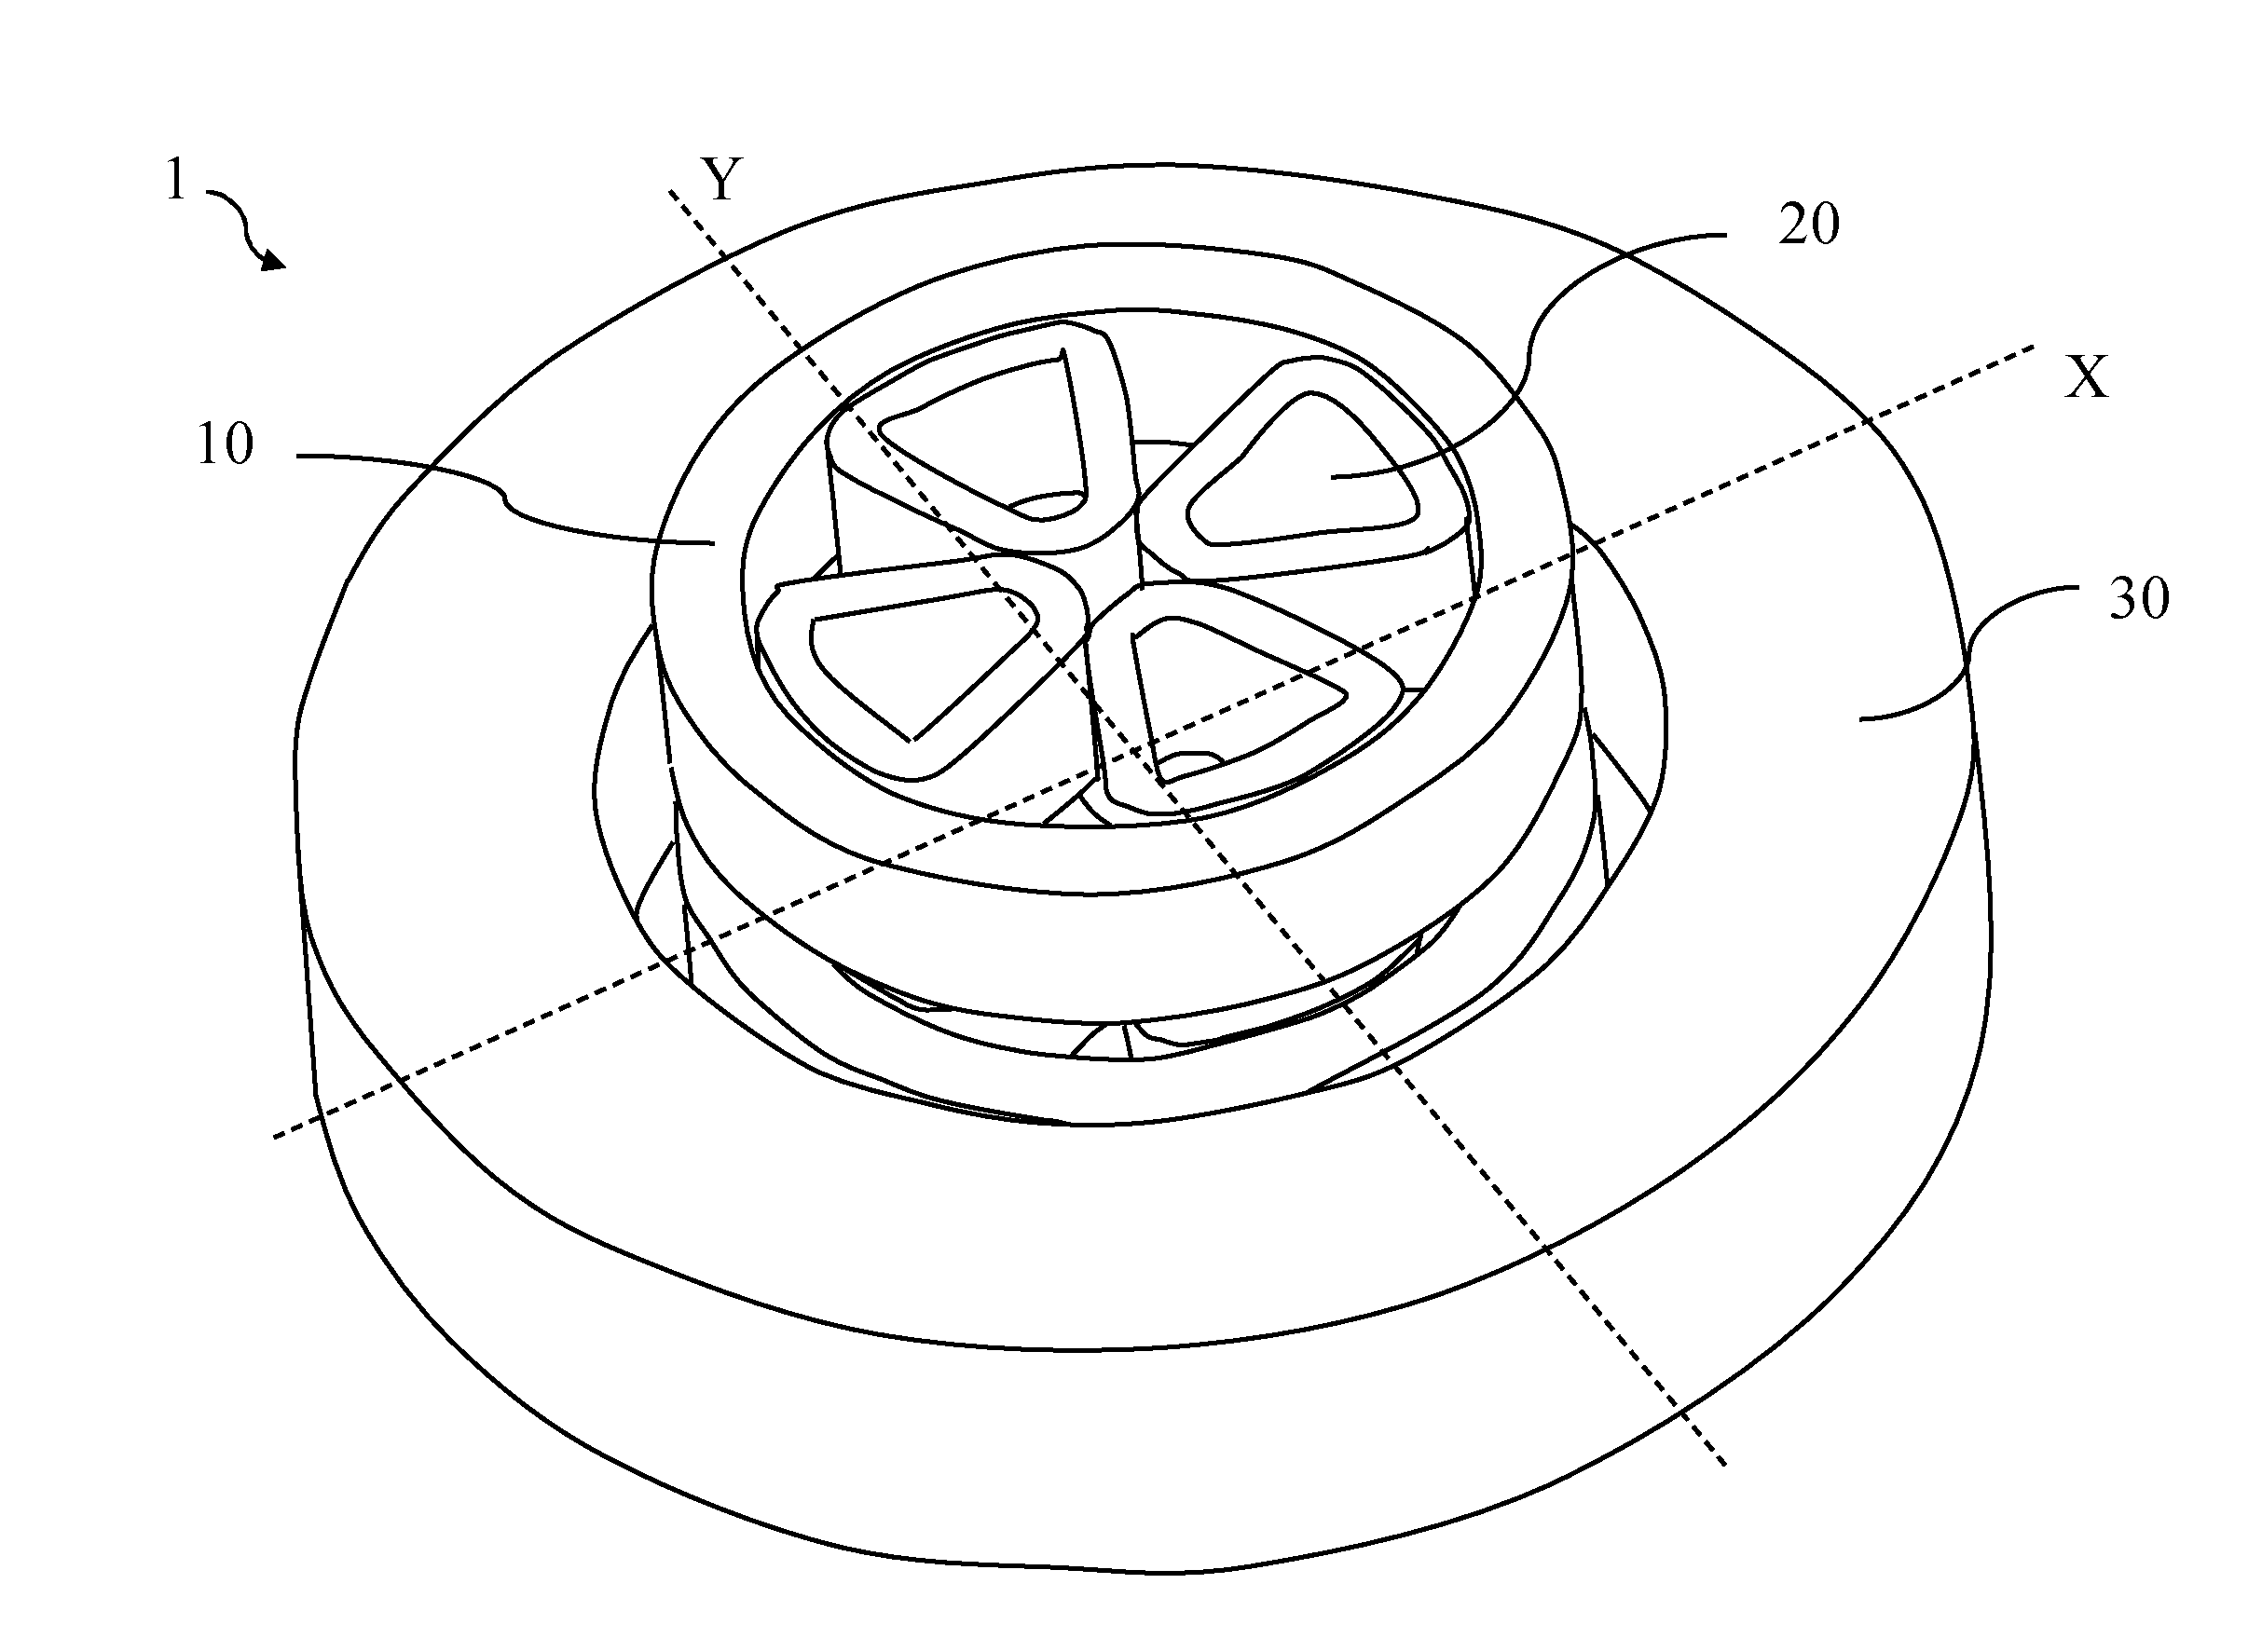 Magnet Structure For An Isochronous Superconducting Compact Cyclotron